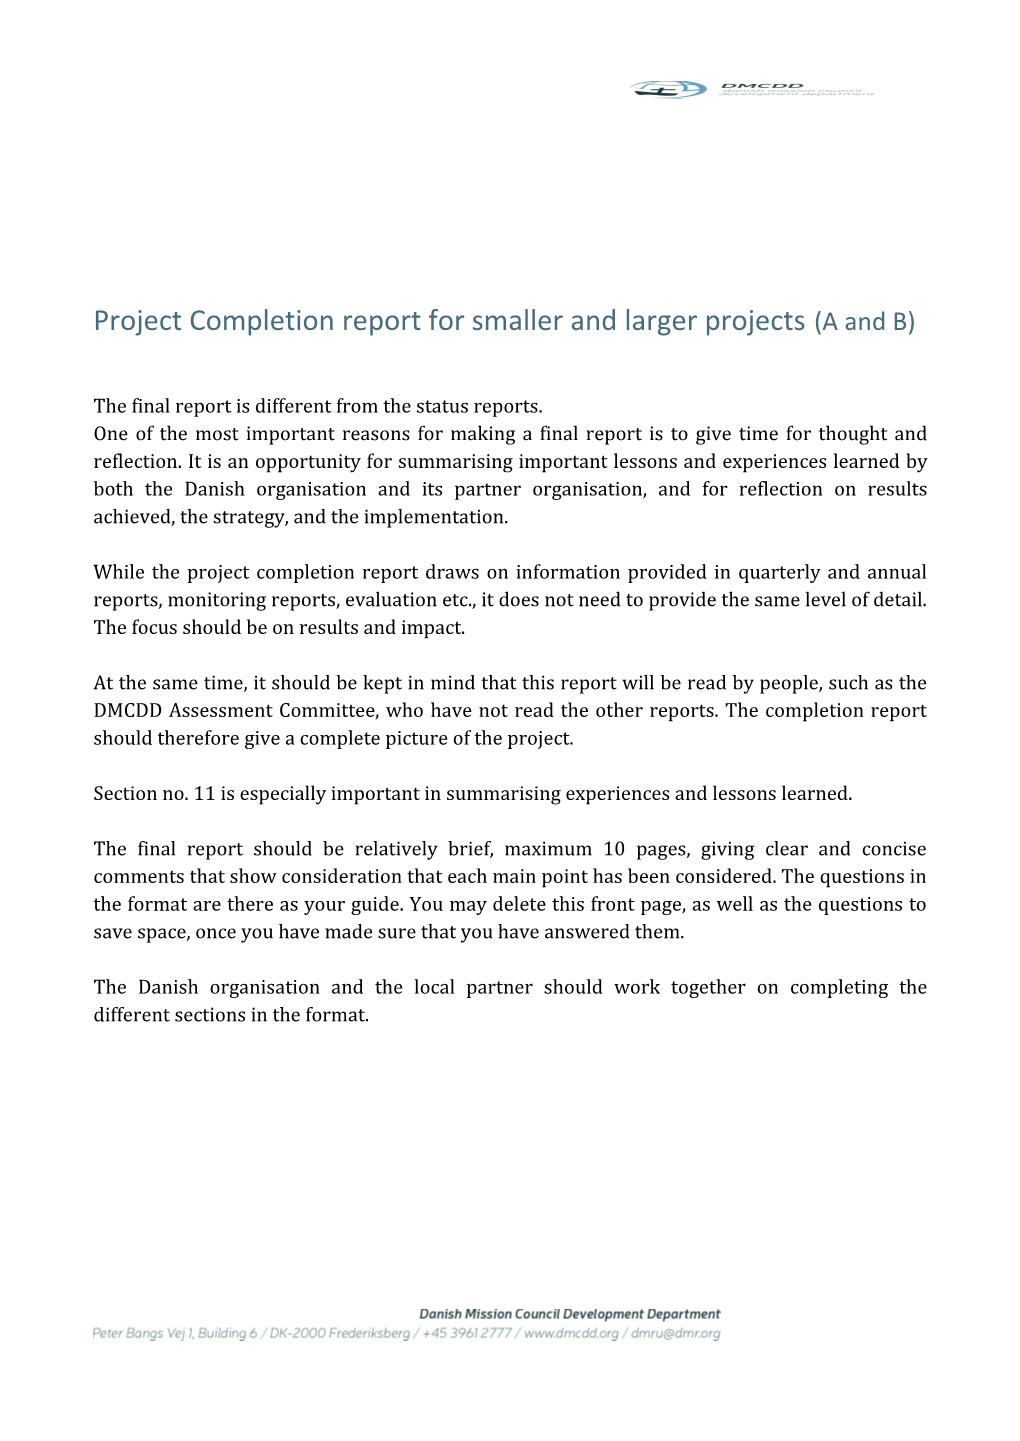 Project Completion Report for Smaller and Larger Projects (A and B)